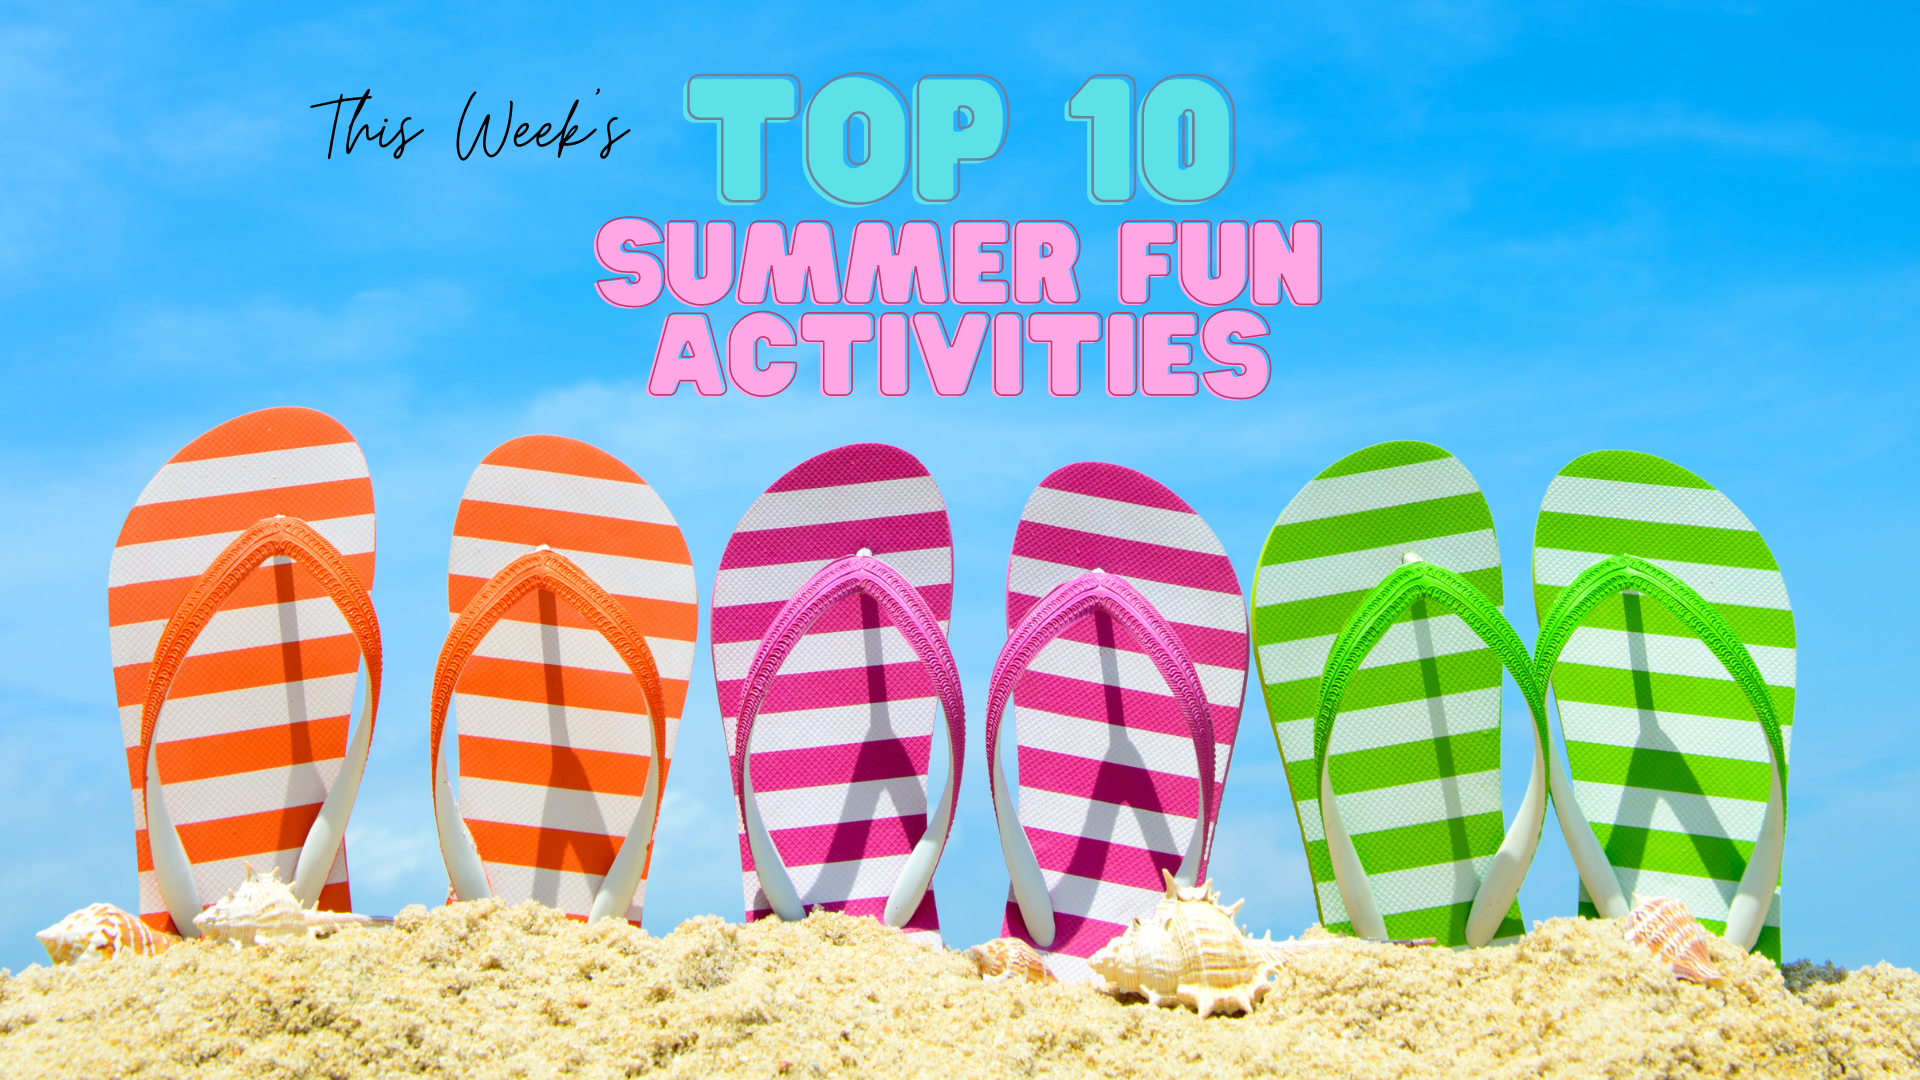 summer fun for moms and kids